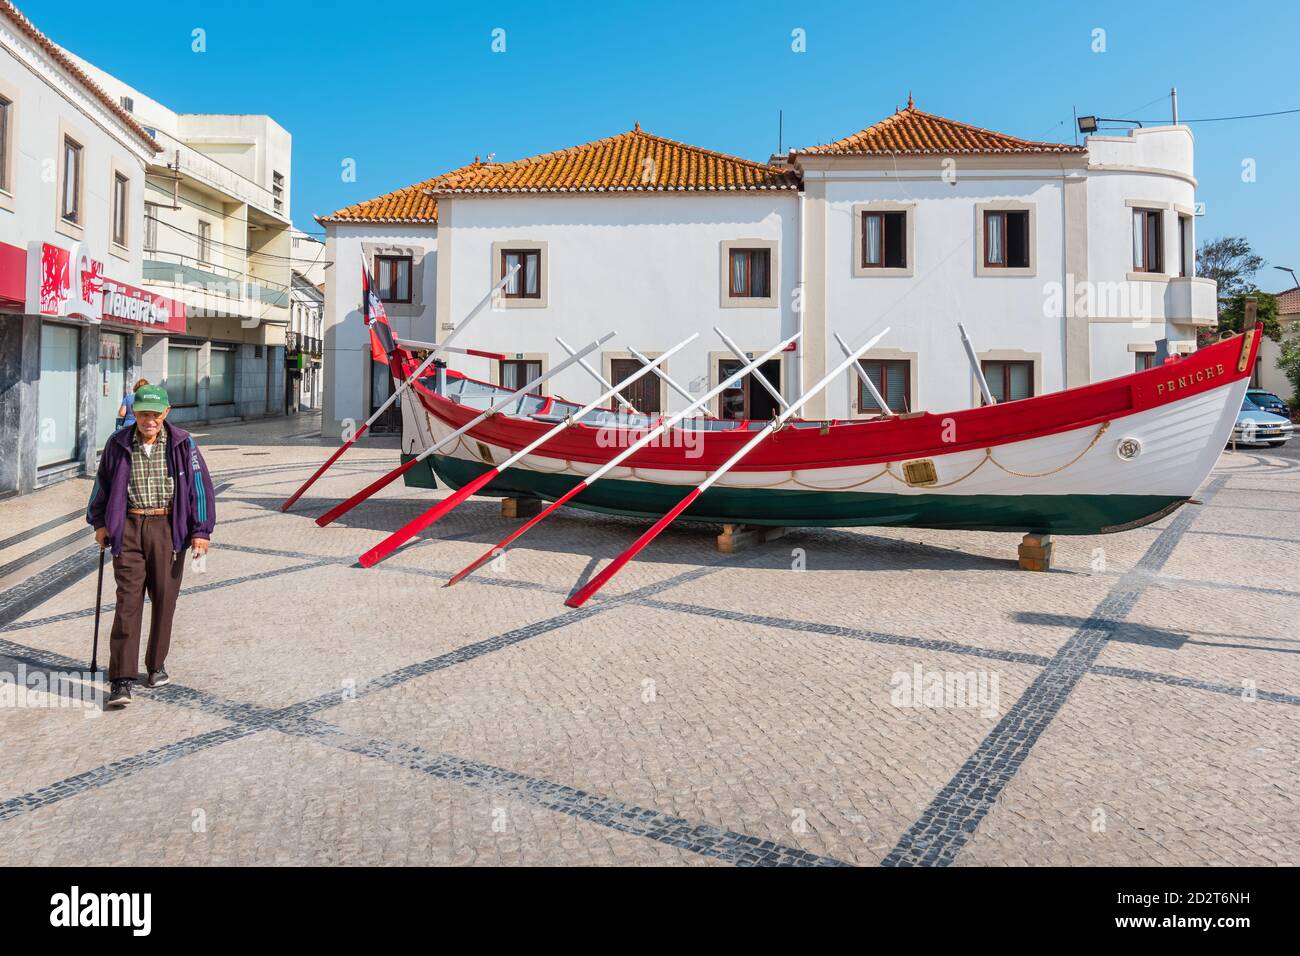 Traditional fishing boat exposed in the town square of Peniche. Portugal Stock Photo